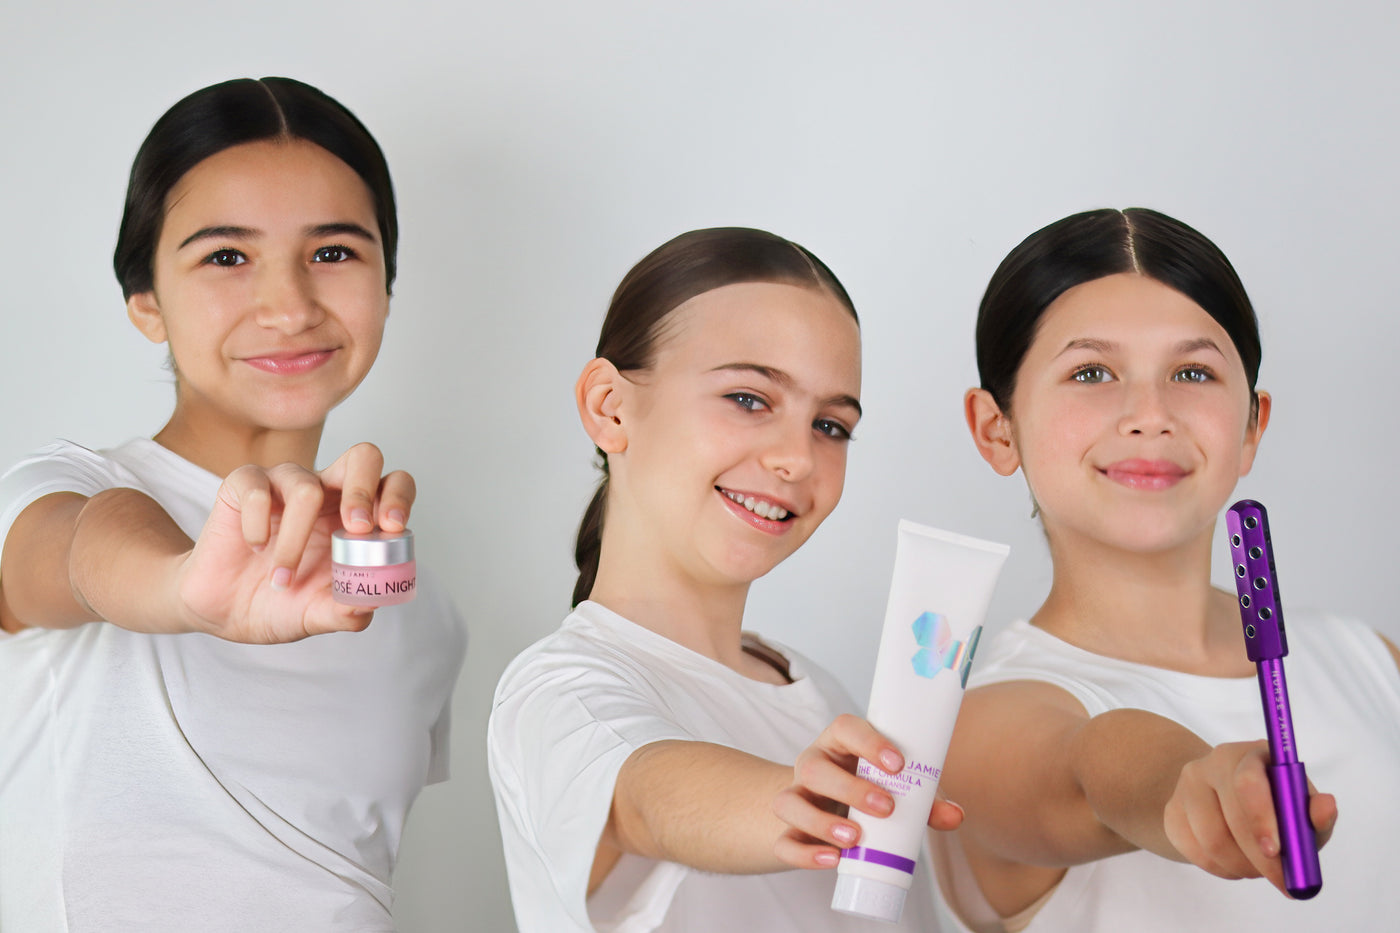 Glowing From Within: Top 4 Underrated Benefits of Teen Skincare